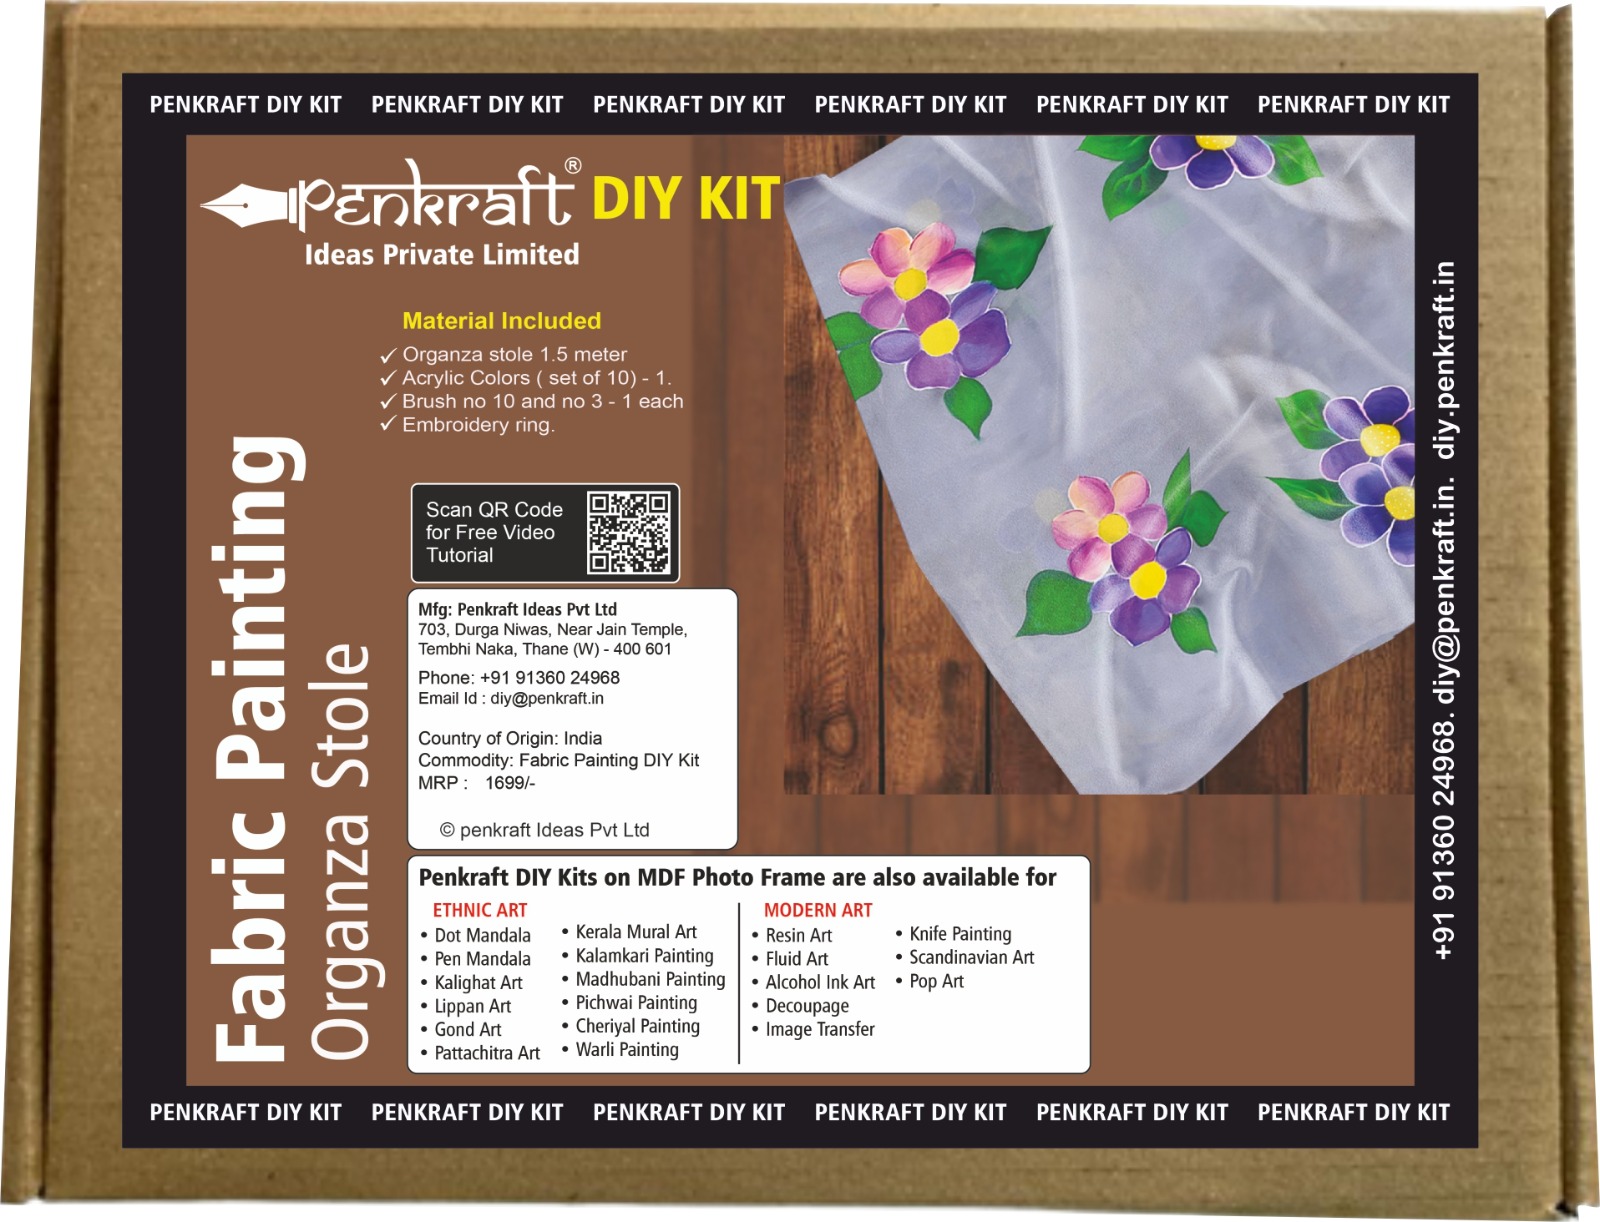 Penkraft Fabric Painting on Organza Stole DIY kit with Free video tutorial